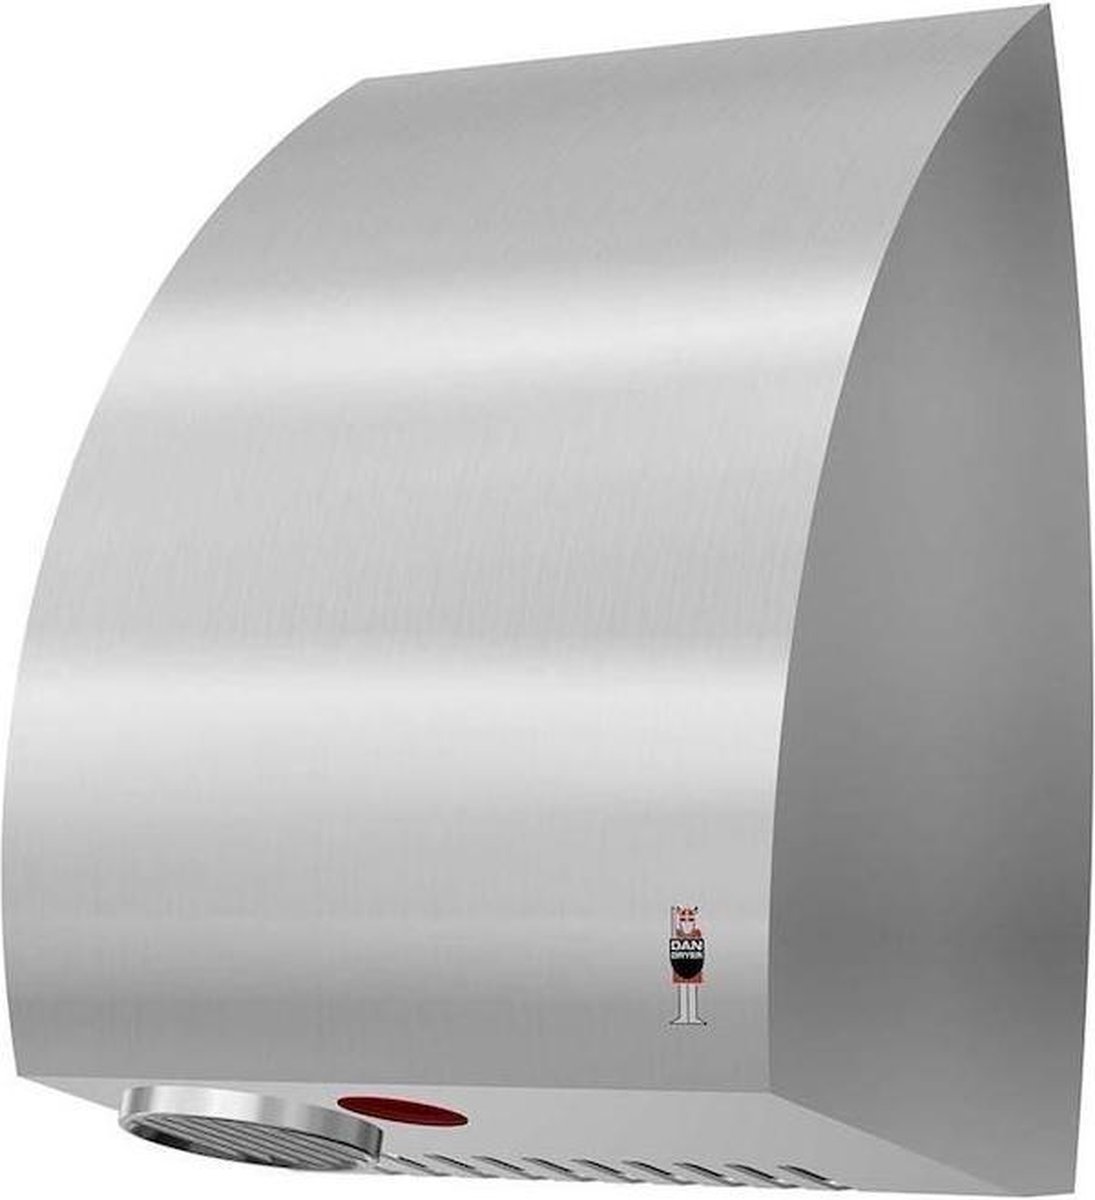 AE hand dryer 2360W with IR sensor and electronic timer from Dan Dryer